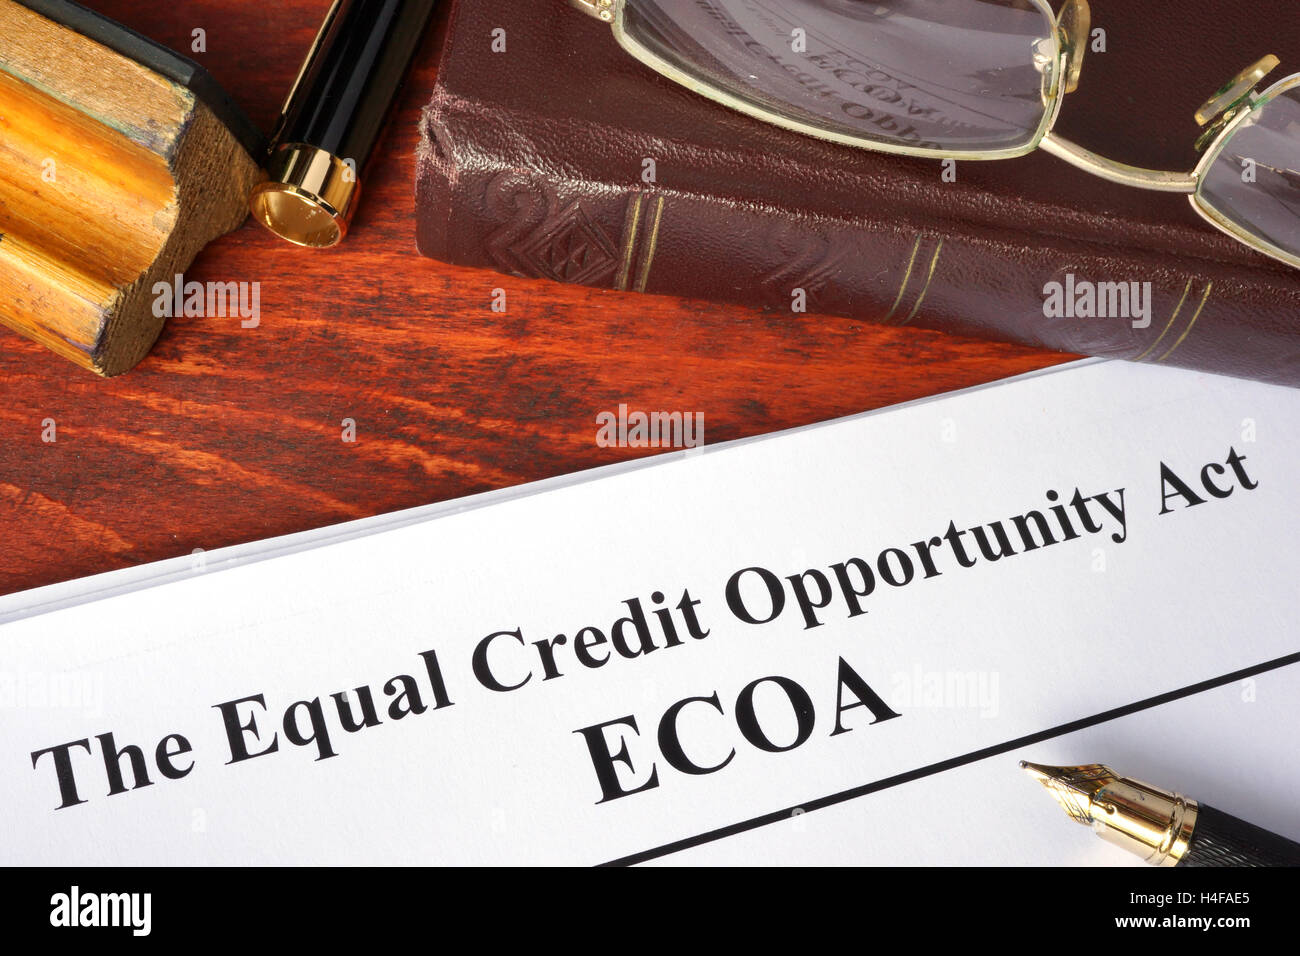 The Equal Credit Opportunity Act (ECOA) and a book. Stock Photo